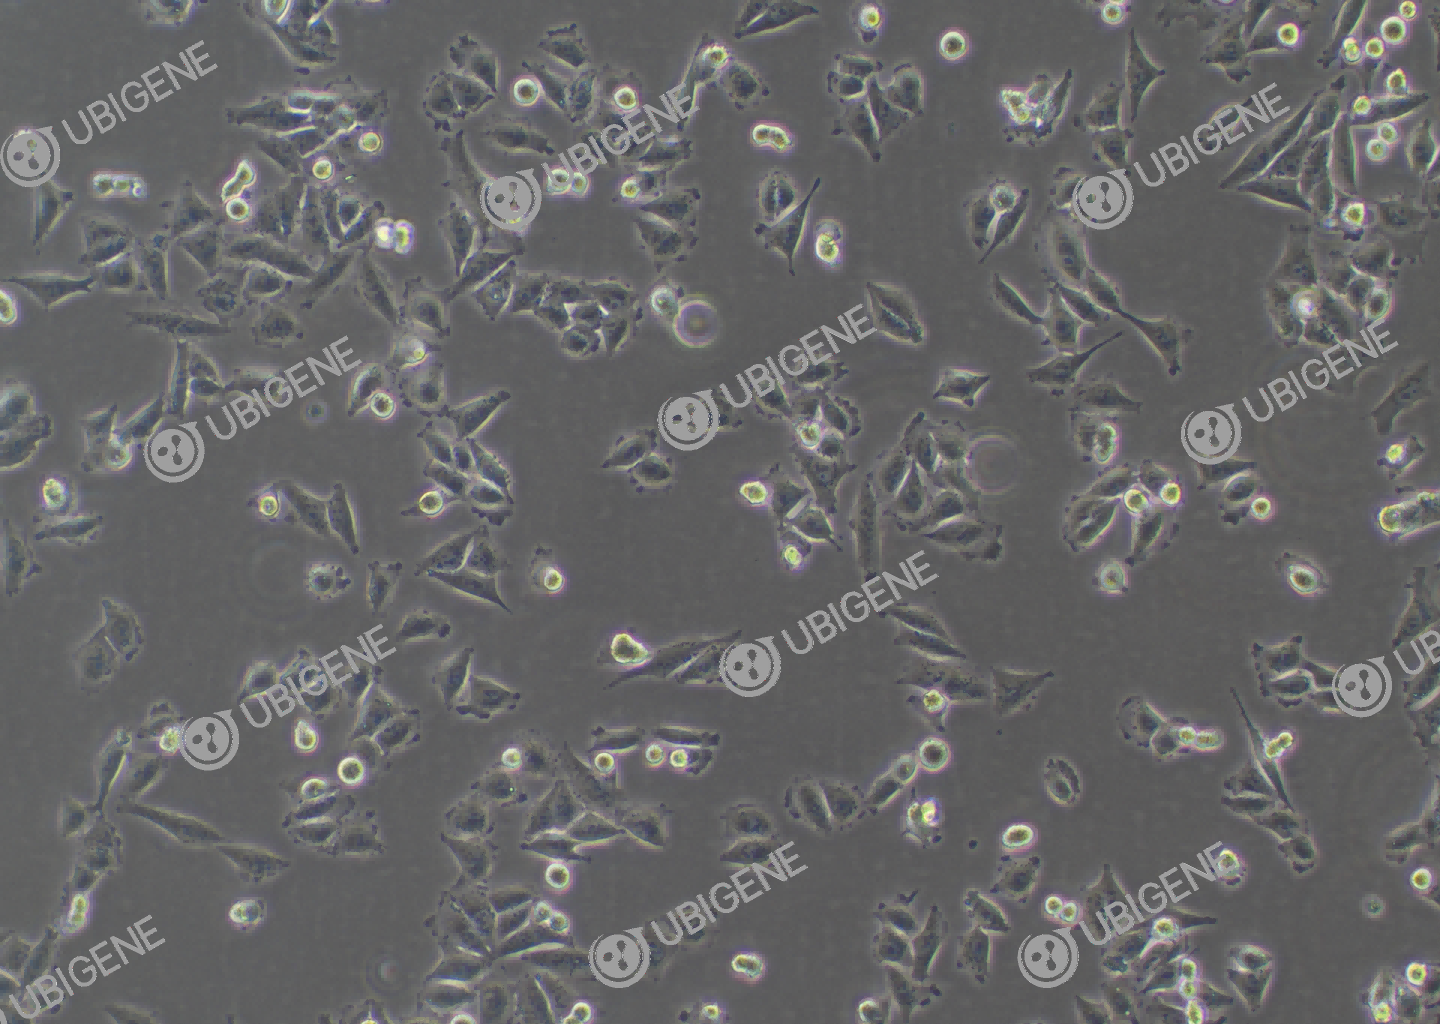 A-375 cell line Cultured cell morphology